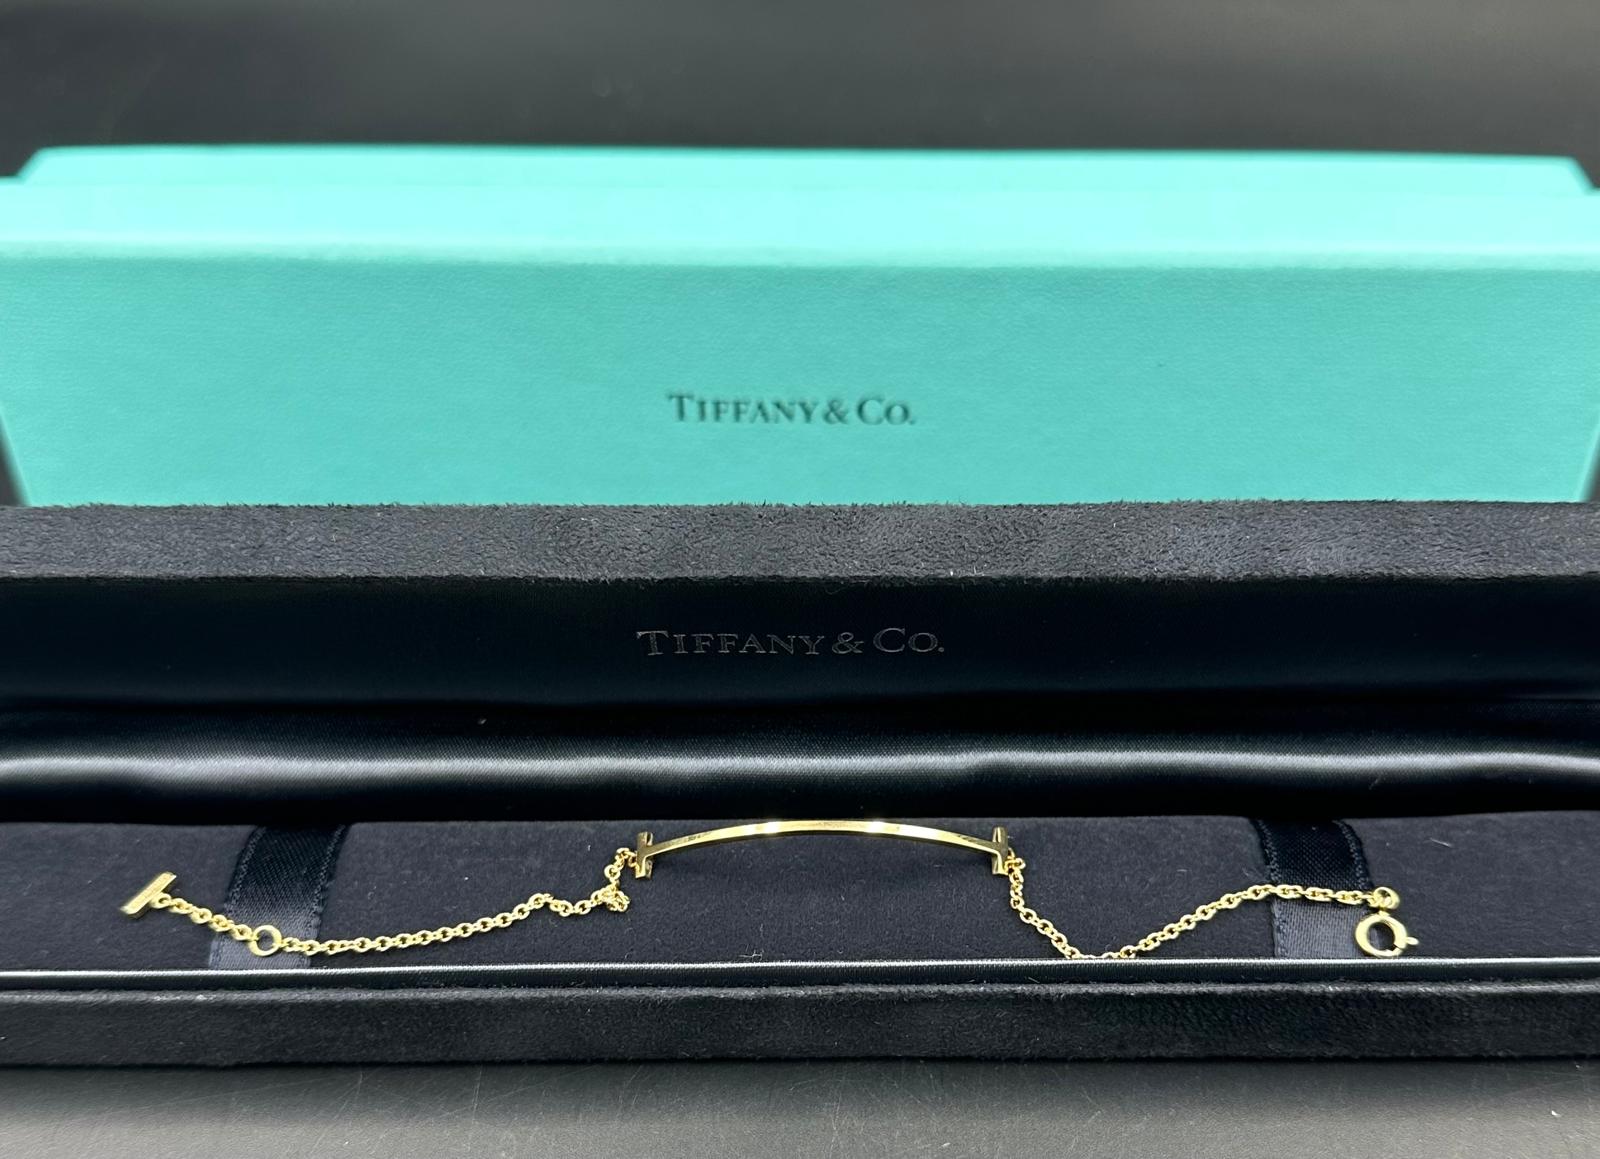 A Tiffany & Co Tiffany T Smile bracelet in 18ct yellow gold in original box. - Image 2 of 2